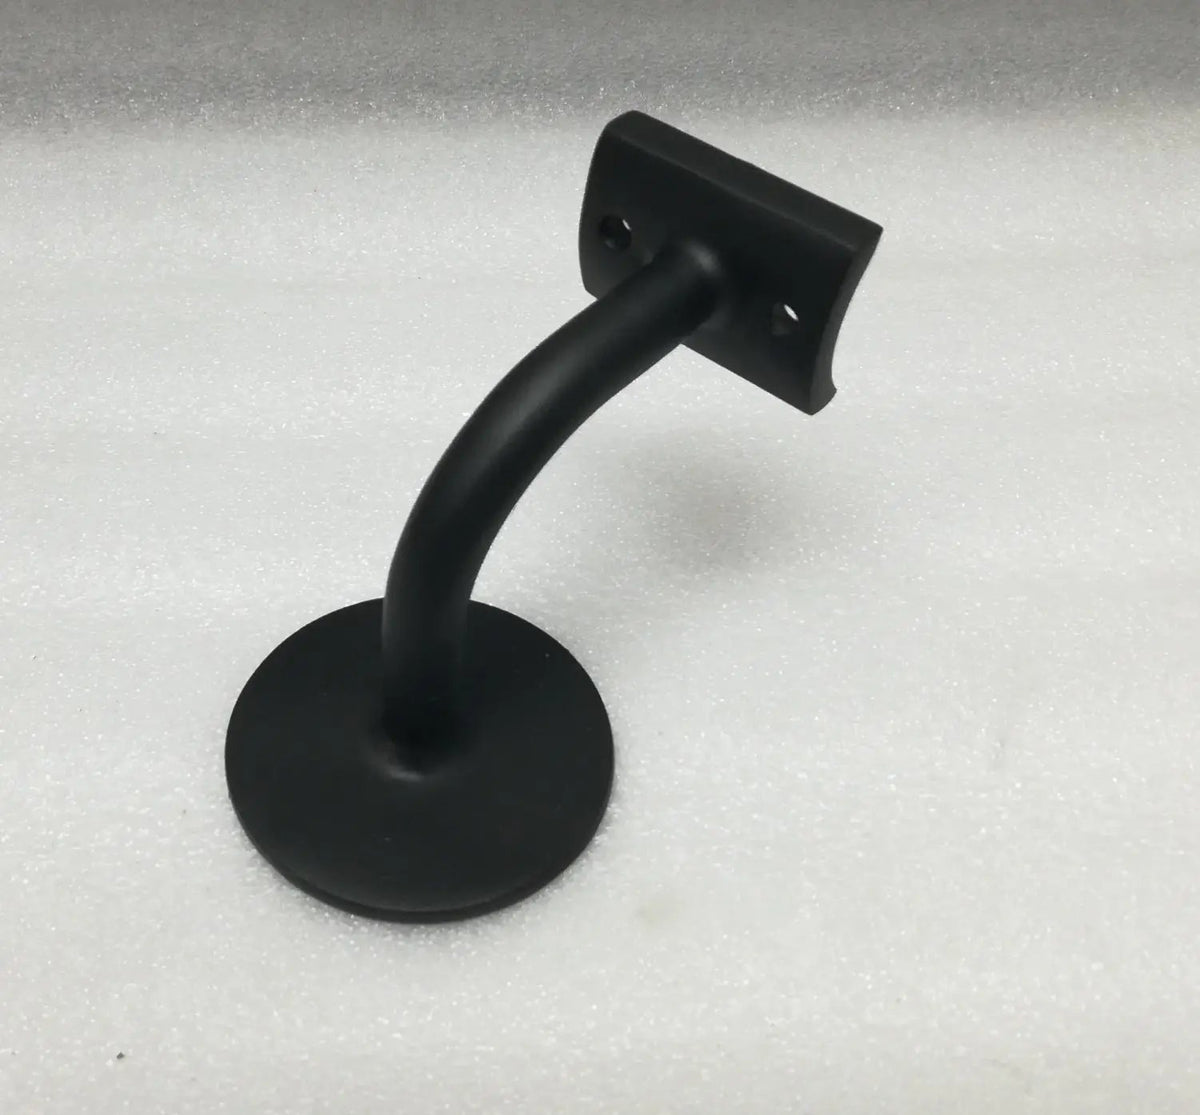 Blind-Stud Hand Rail Bracket for 1-1/2" Tubing Brackets, Components for 1-1/2" Od Tubing Matteblackpowdercoatedfinish-Pleasecallforpricing Trade Diversified